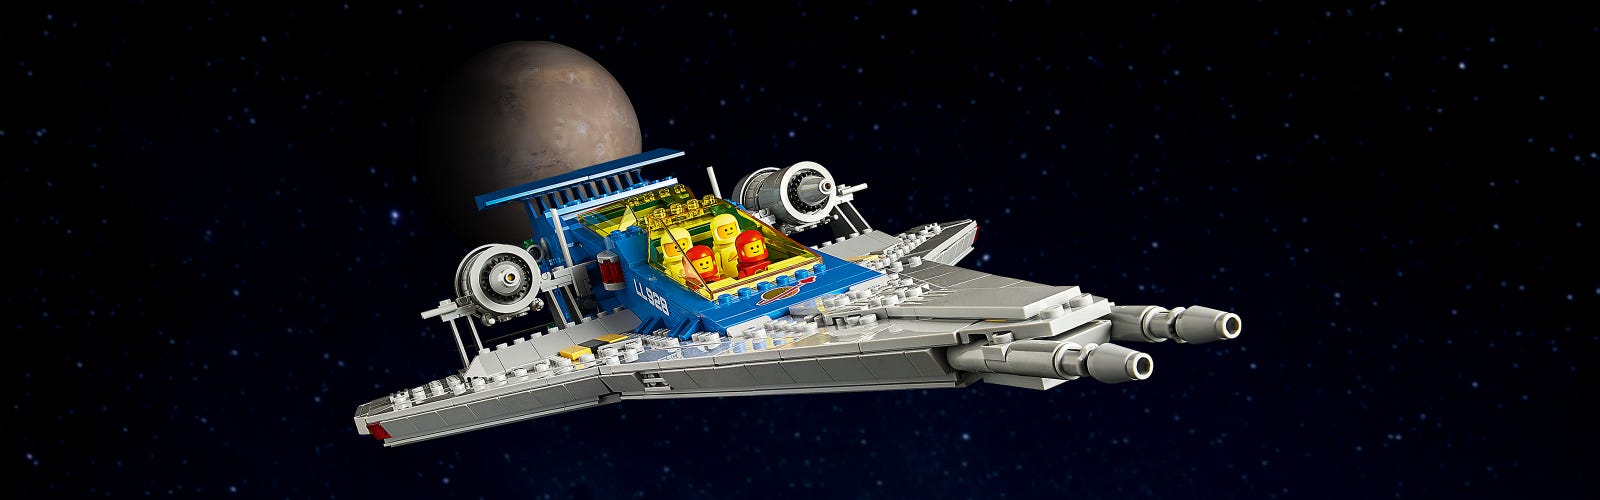 Enjoy one of the most impressive vacations when you build the LEGO Las